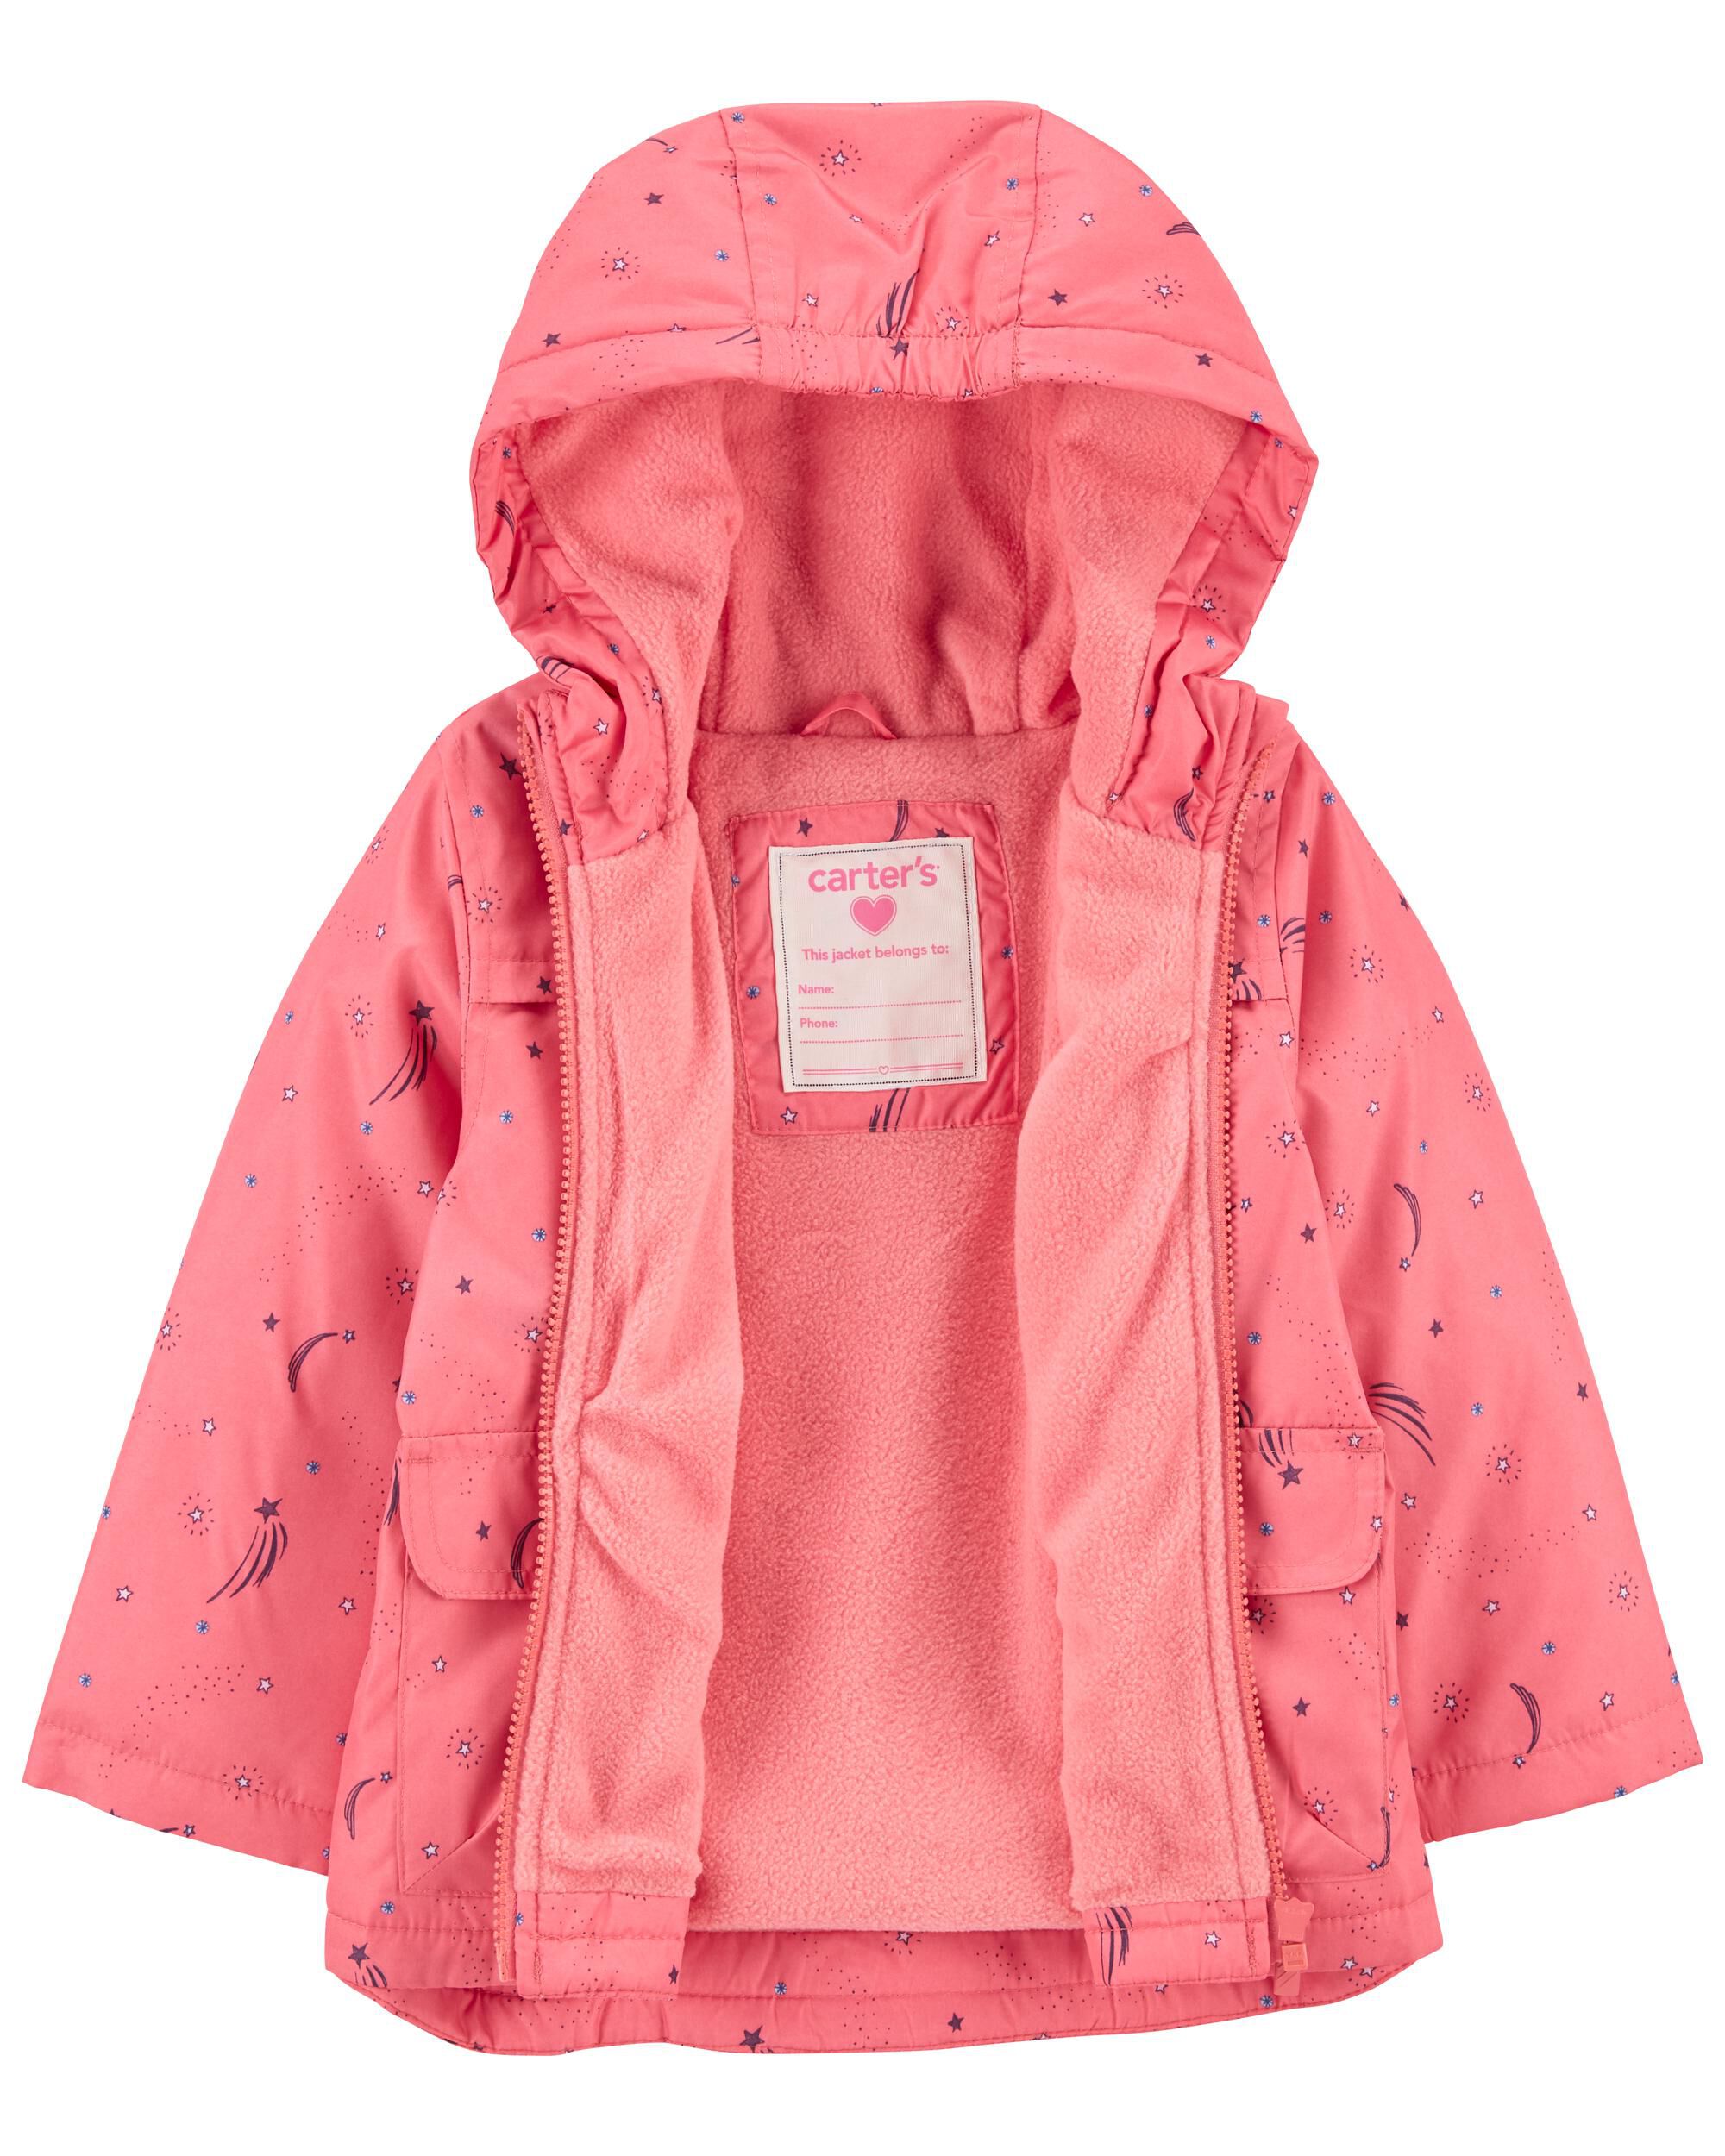 Carters Little Girls Printed Jersey Lined Jacket 